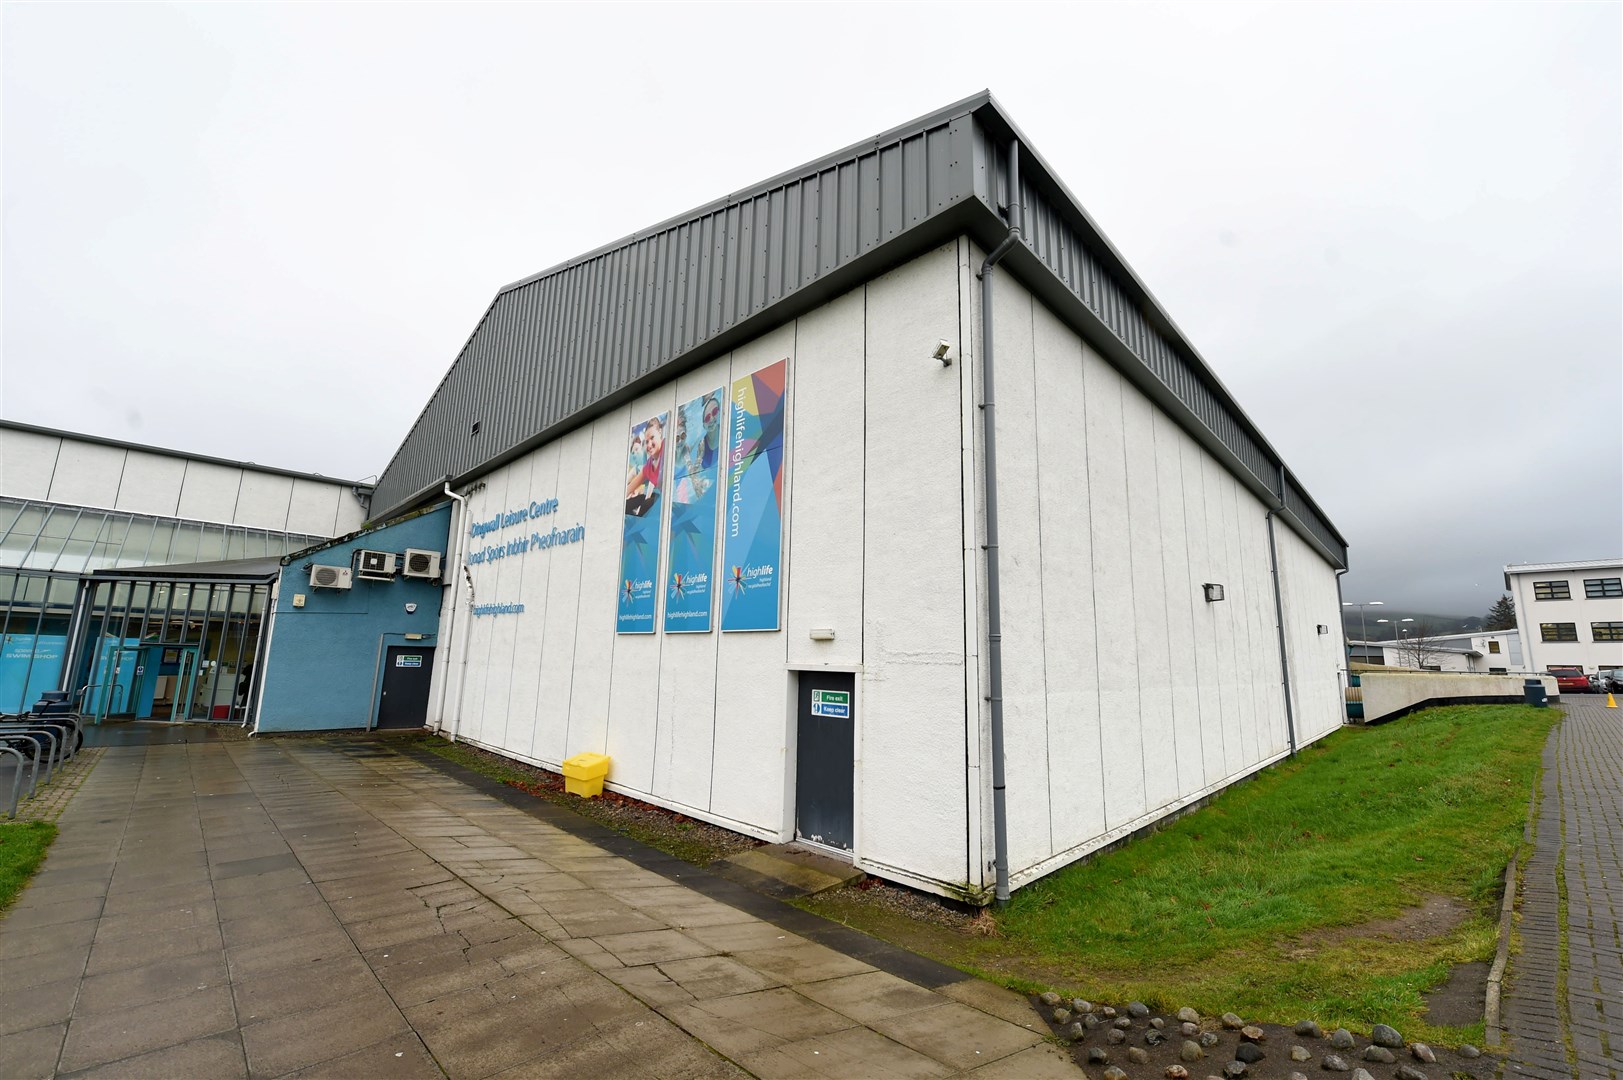 Dingwall Leisure Centre is now fully closed to customers.